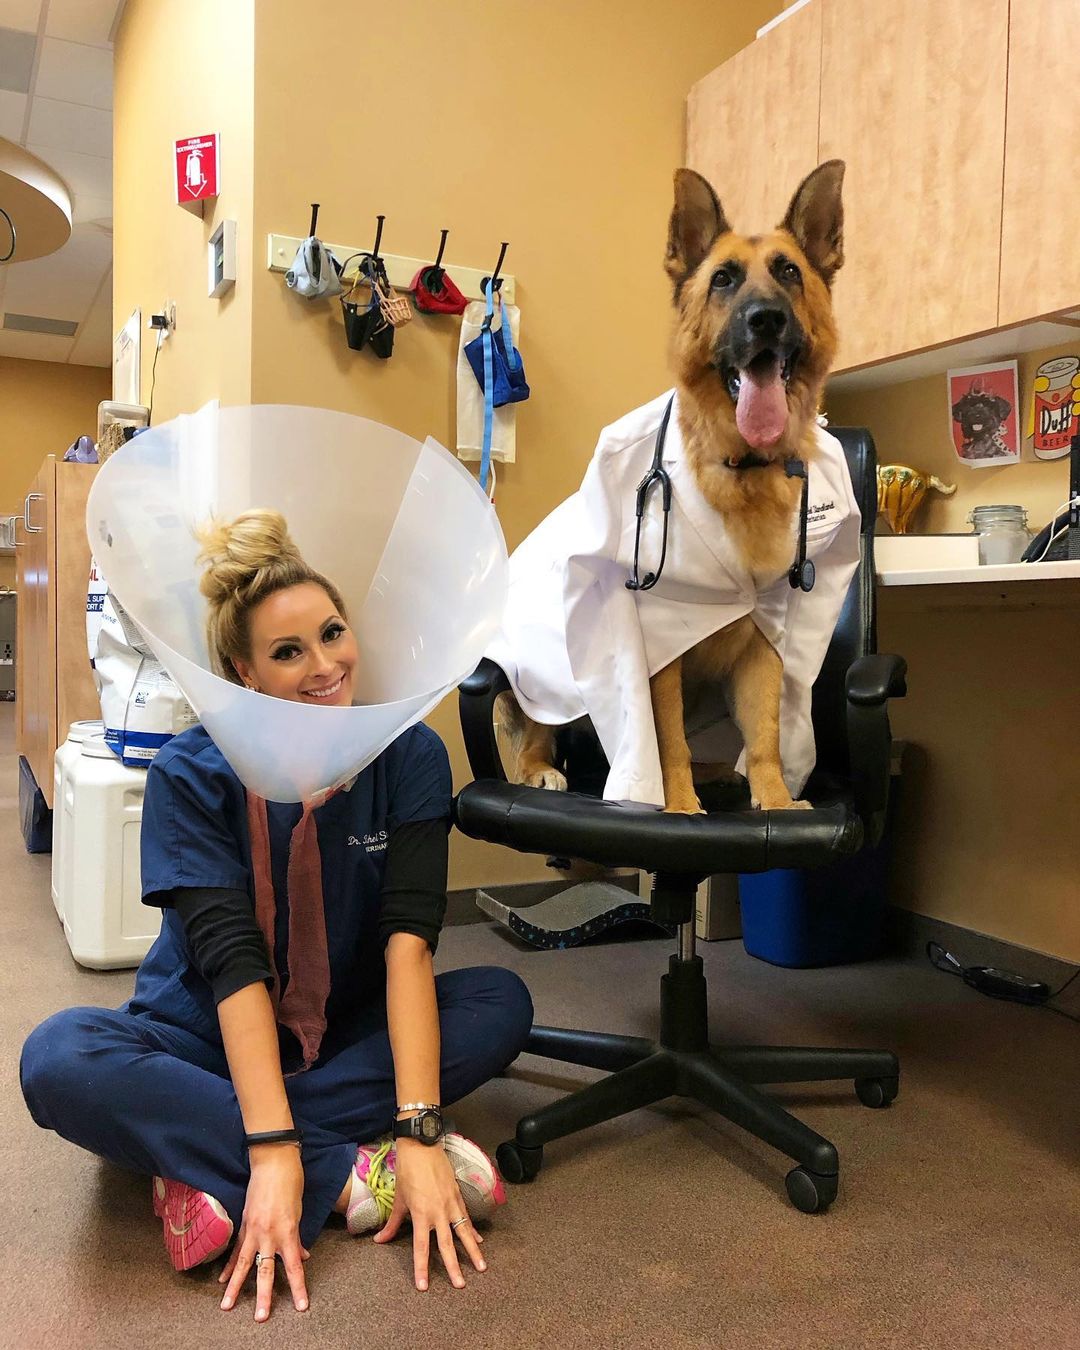 vet wears dog cone on ground while dog sits in chair wearing vet's coat